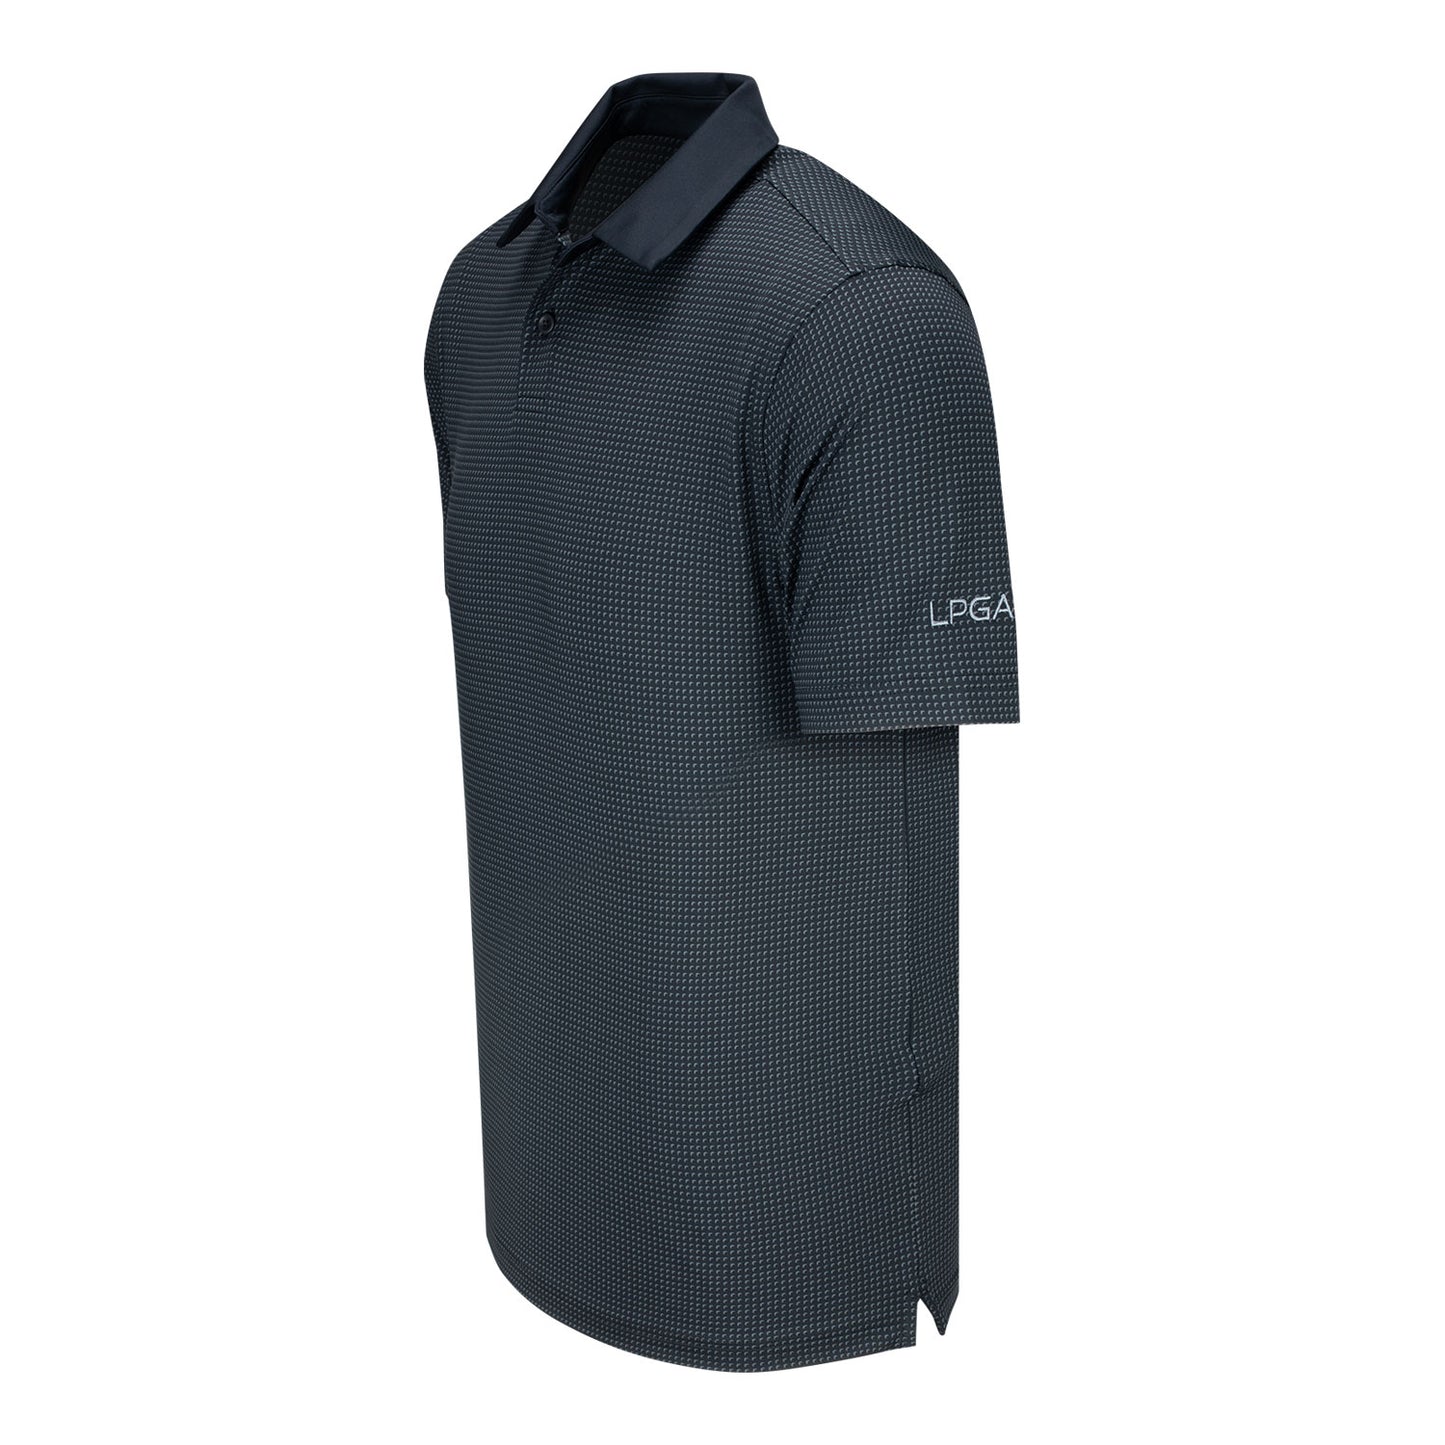 Under Armour 2023 LPGA Men's Half Moons Short Sleeve Polo - Angled Left Side View